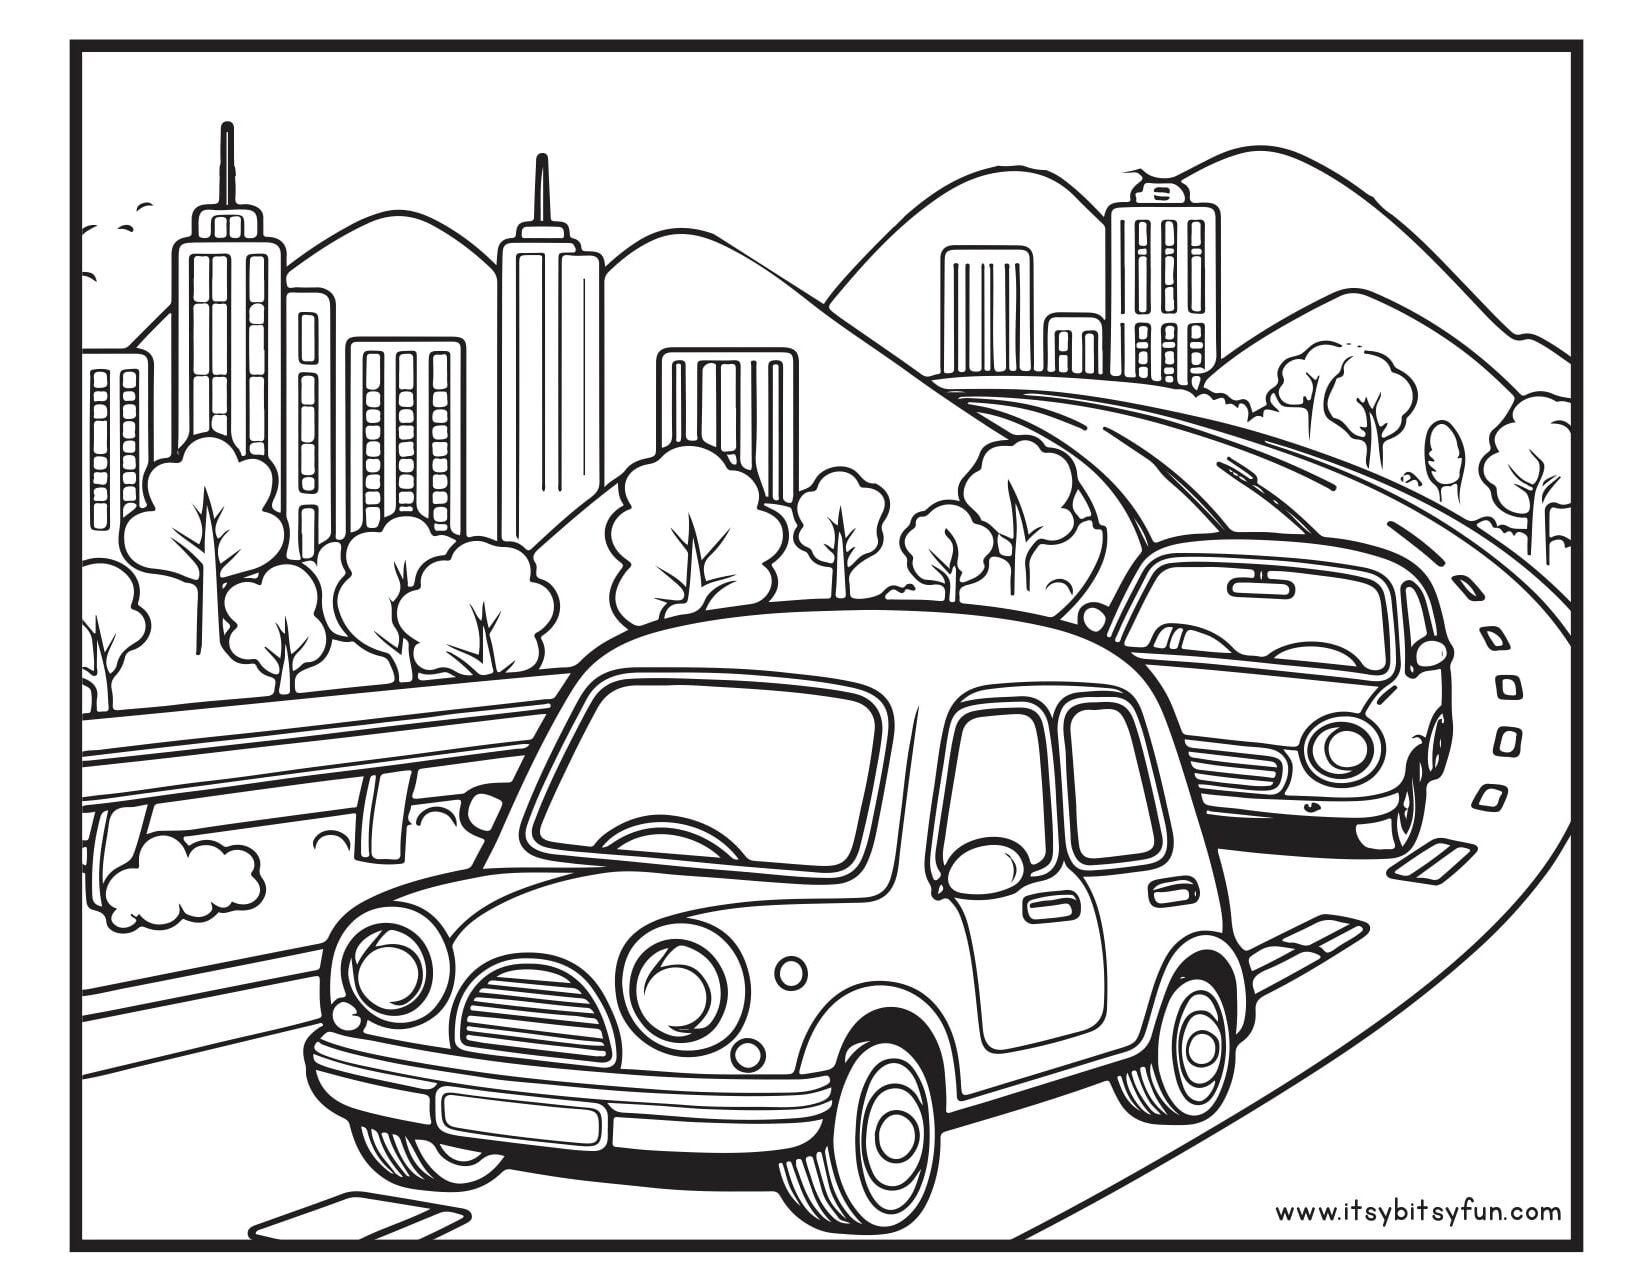 Highway and cars coloring page.